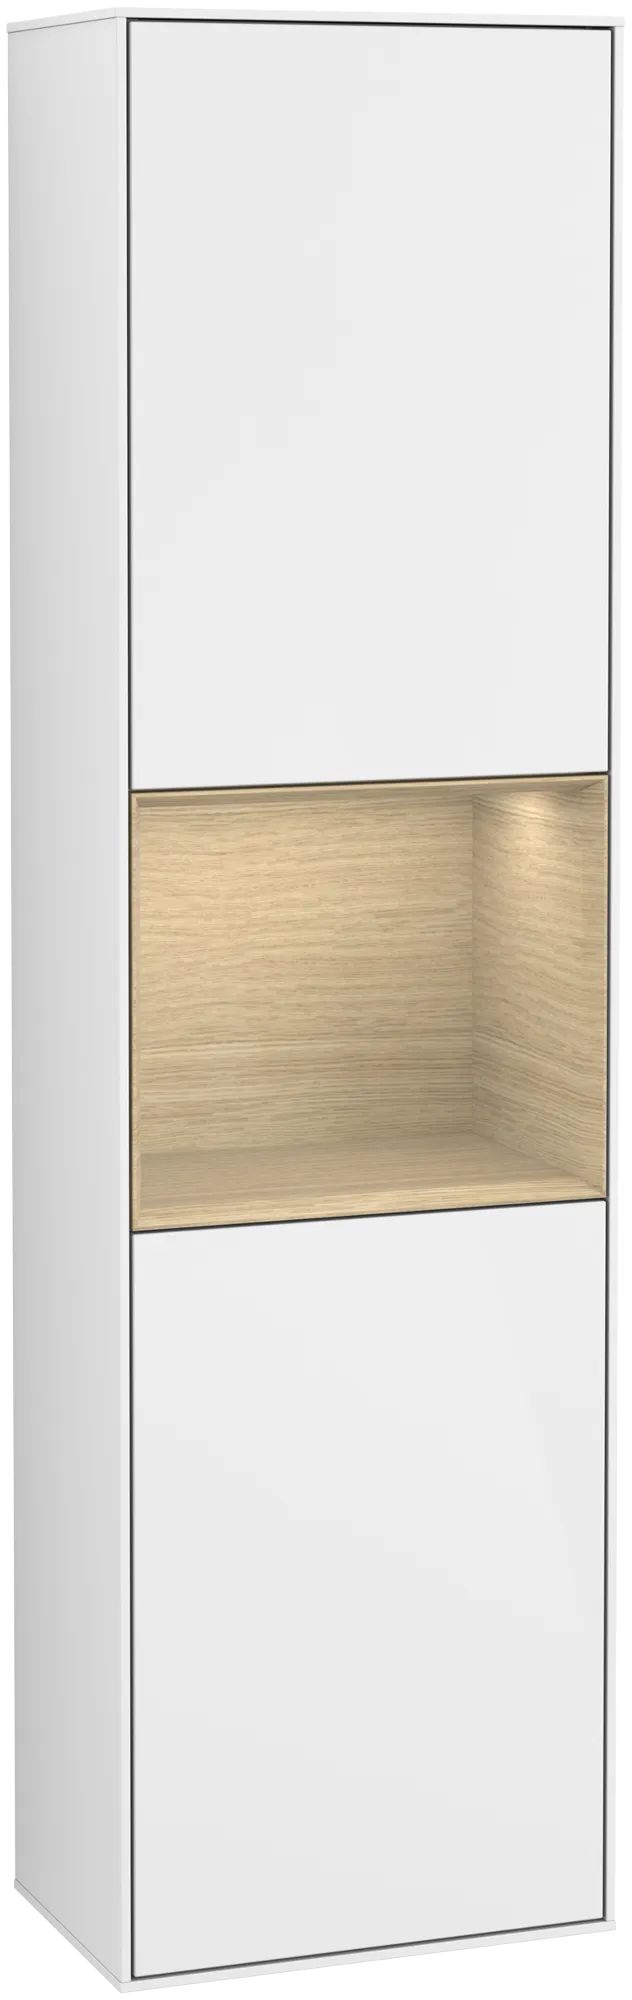 VILLEROY BOCH Finion Tall cabinet, with lighting, 2 doors, 418 x 1516 x 270 mm, Glossy White Lacquer / Oak Veneer #G470PCGF resmi